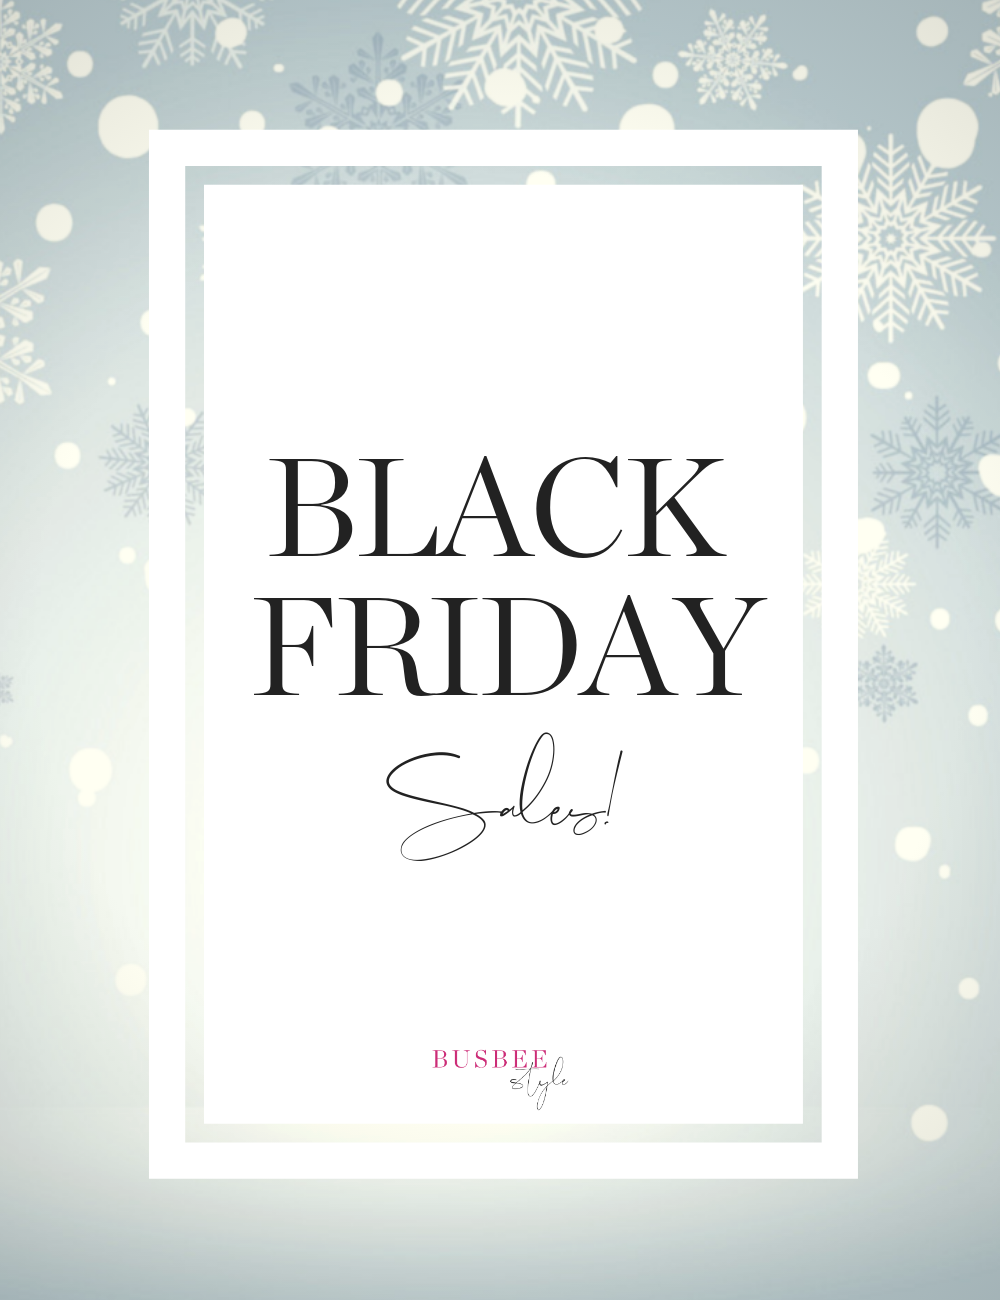 Black Friday Sales 2019, Fashion blogger Erin Busbee of BusbeeStyle.com sharing black friday sales and picks from each retailer having a sale